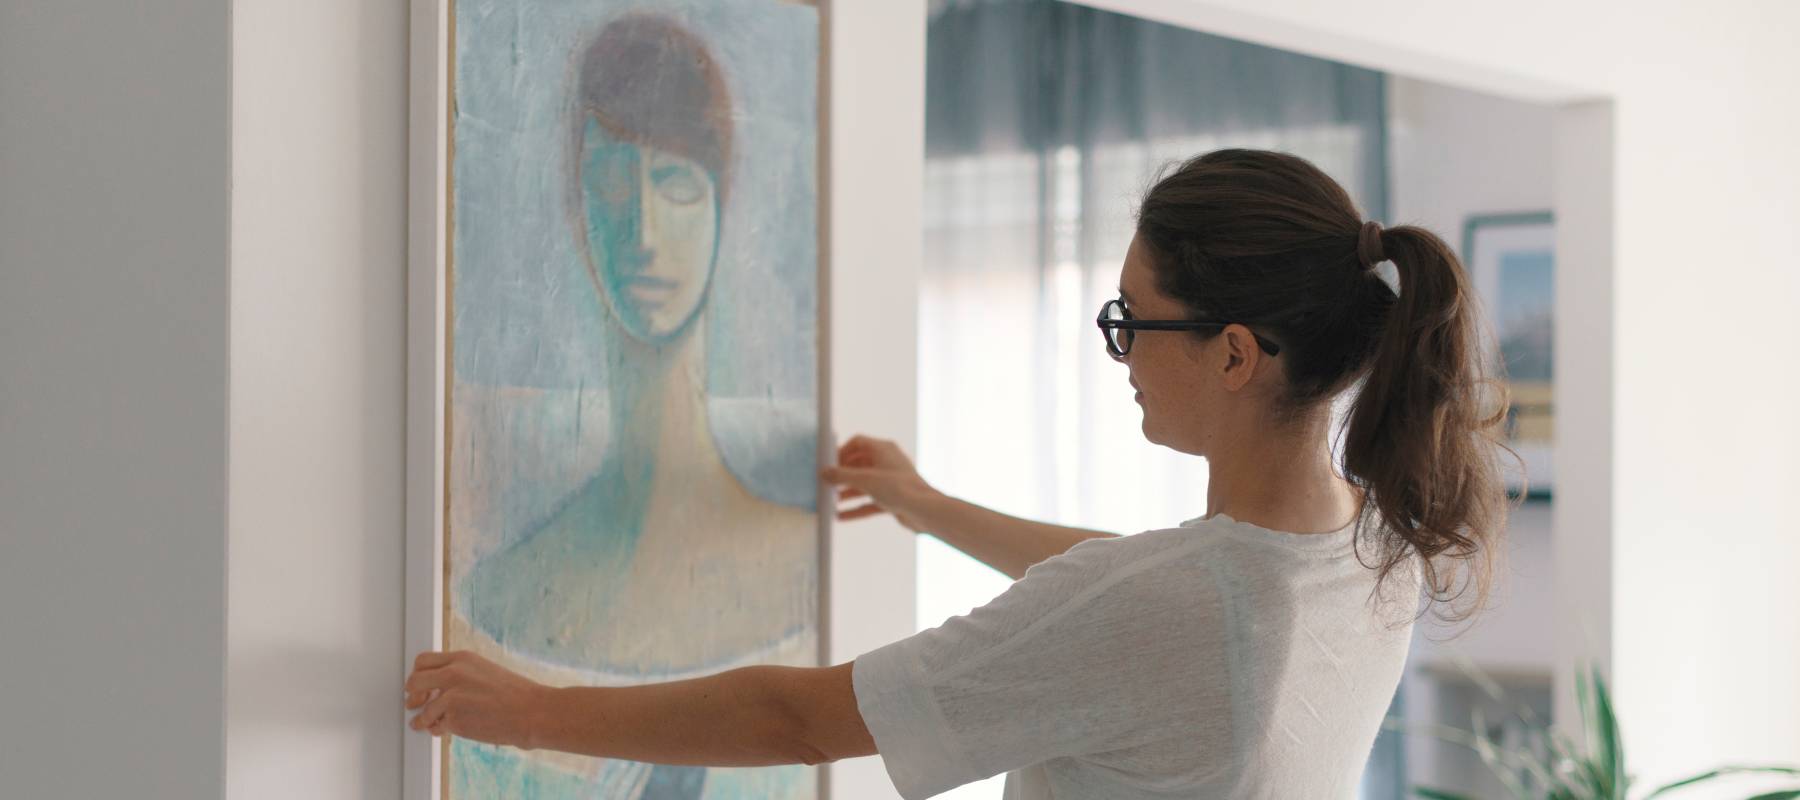 Woman putting up artwork in her home